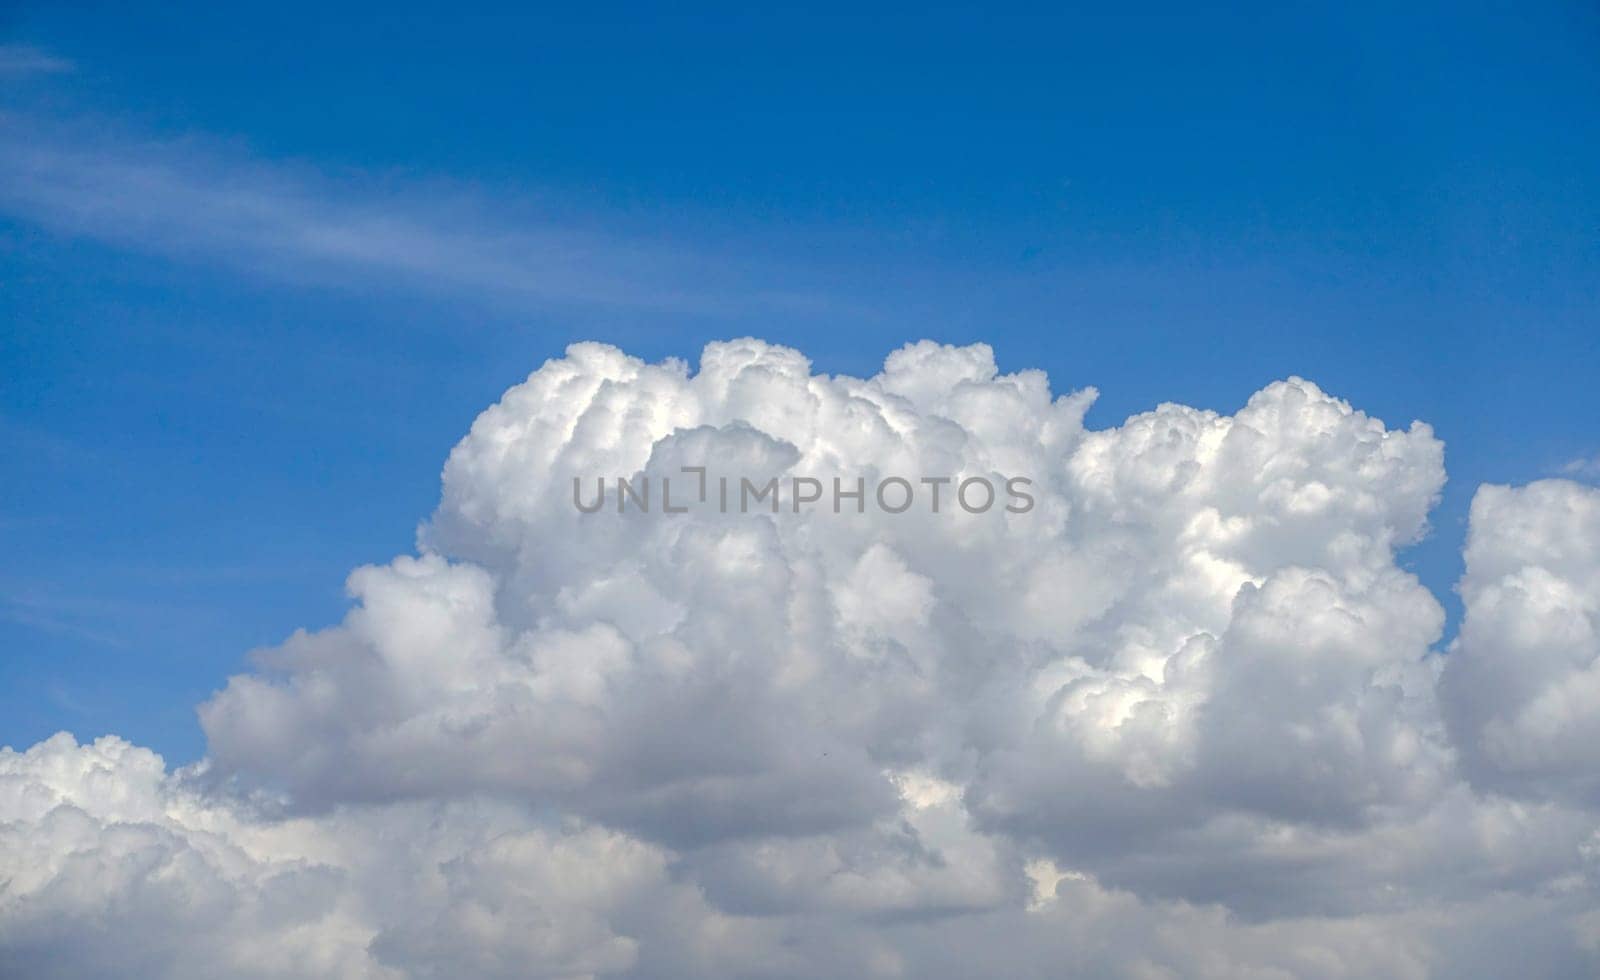 interesting cloud clusters in the sky, heavy rain clouds, interesting cloud shapes, wonderful white clouds that look like cotton,